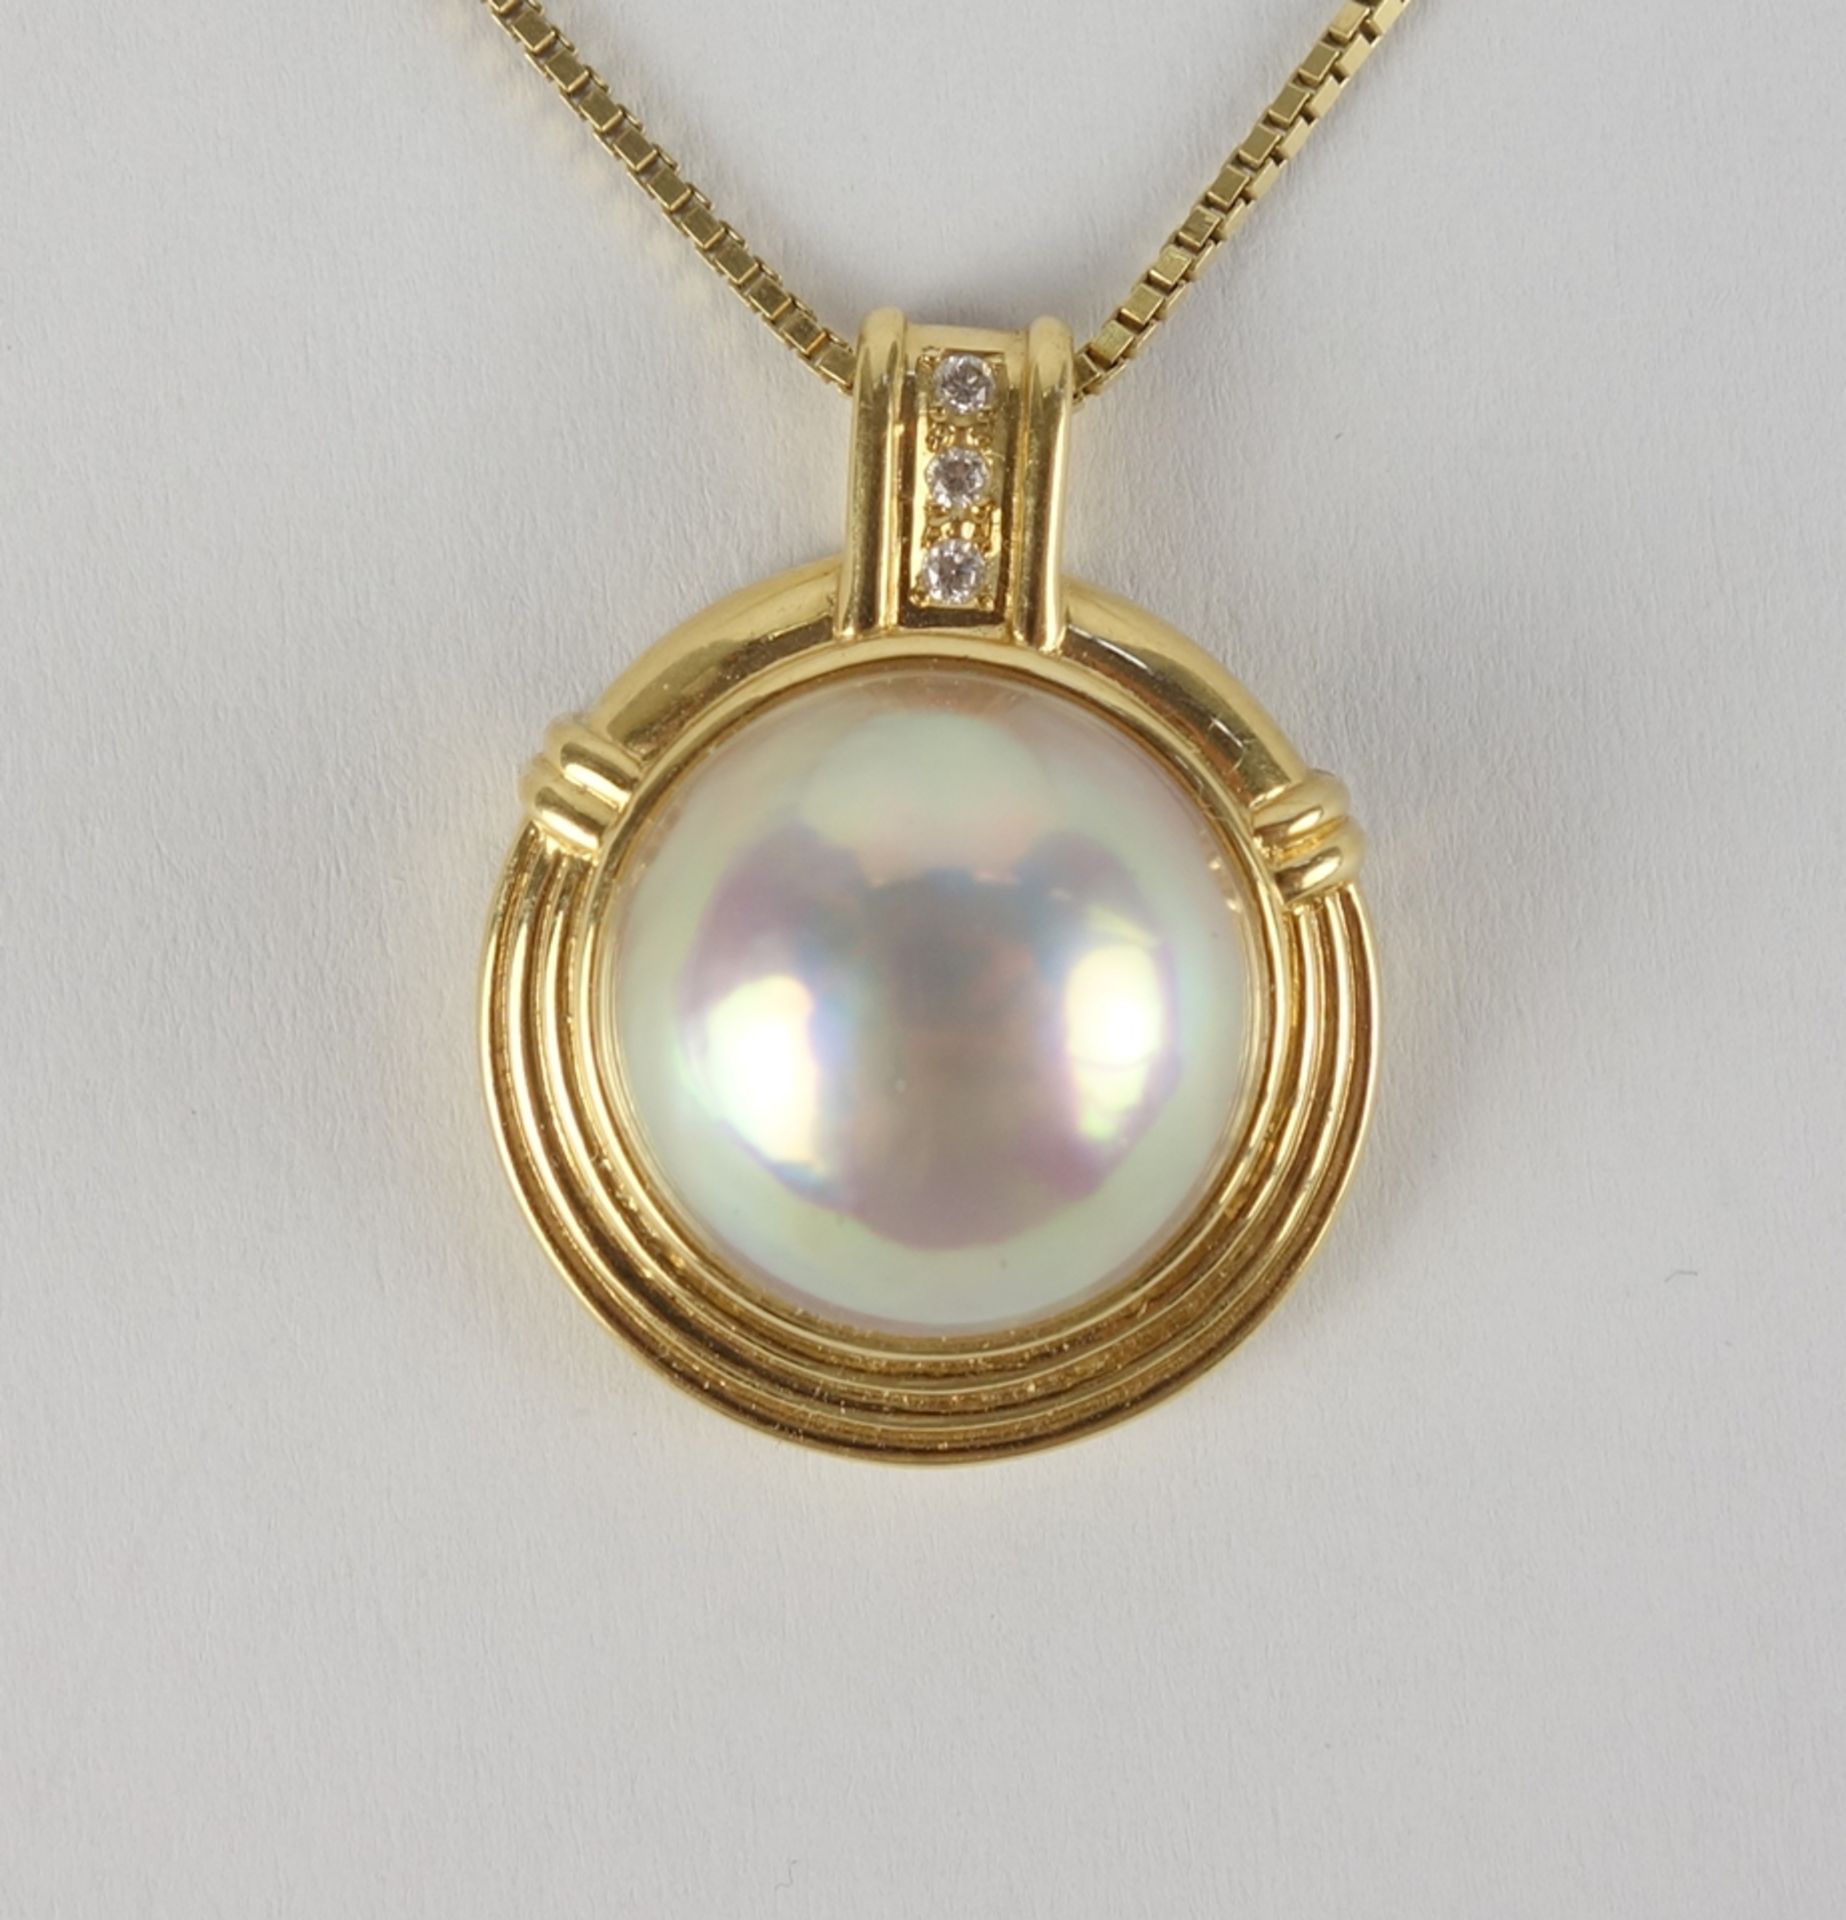 Pendant with mabé pearl and 3 diamonds on chain, 18K gold - Image 2 of 2